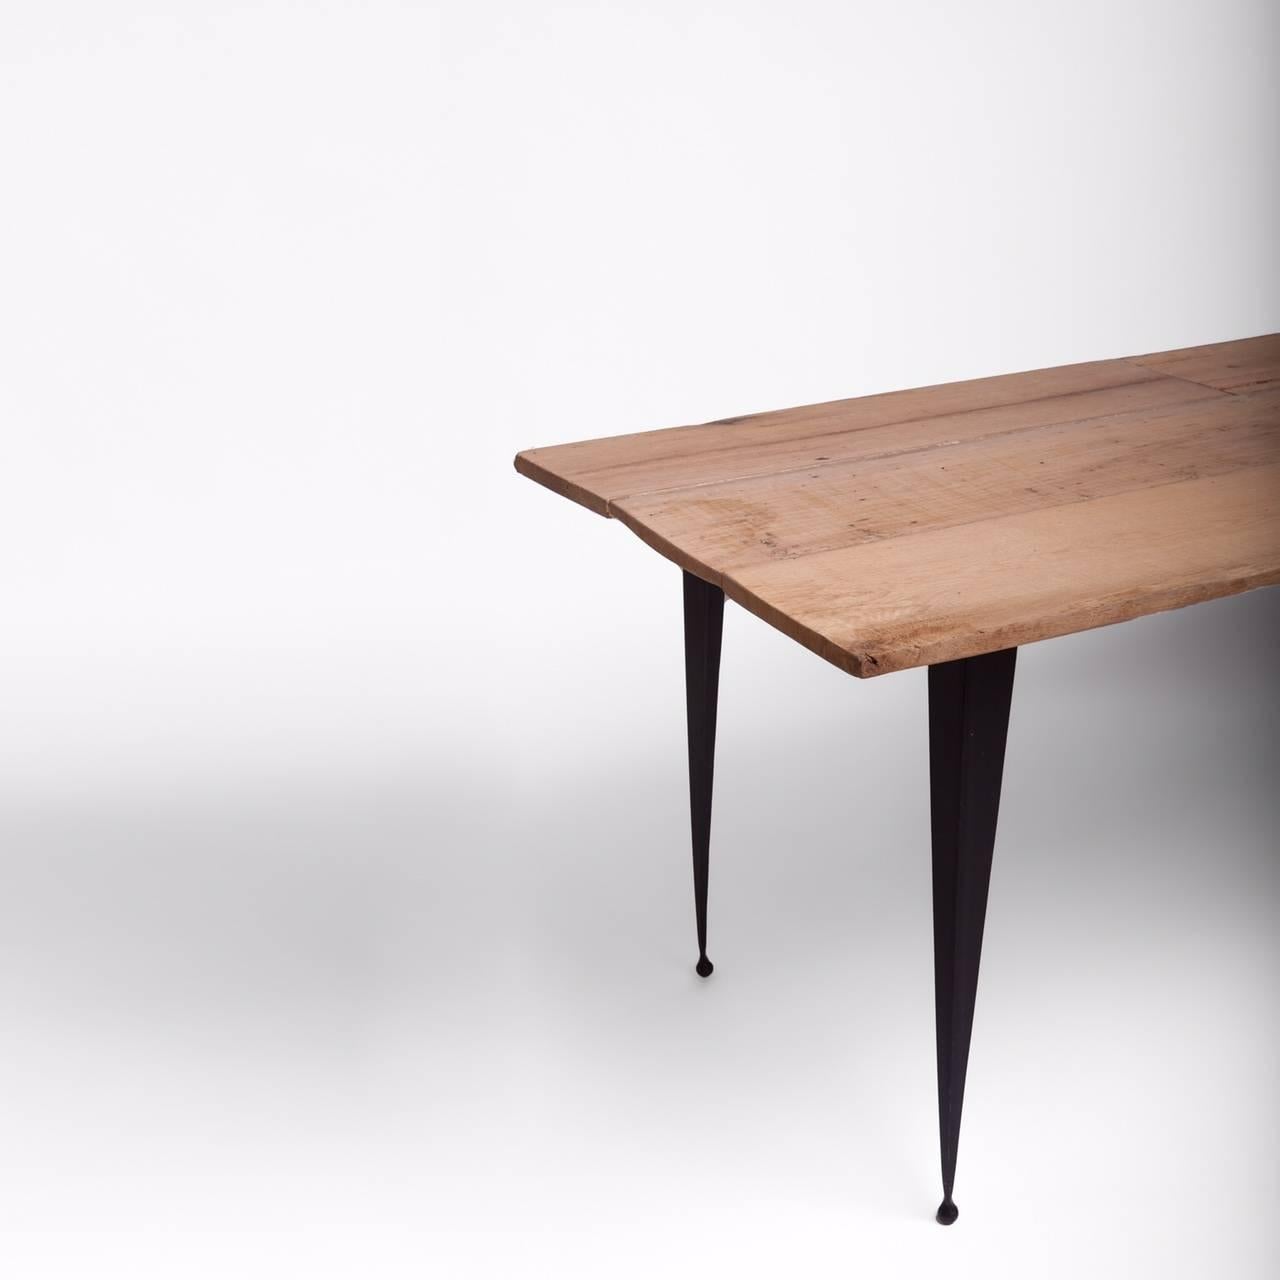 Contemporary Made to Order Reclaimed Oak Top Table with Tapered Black Iron Legs